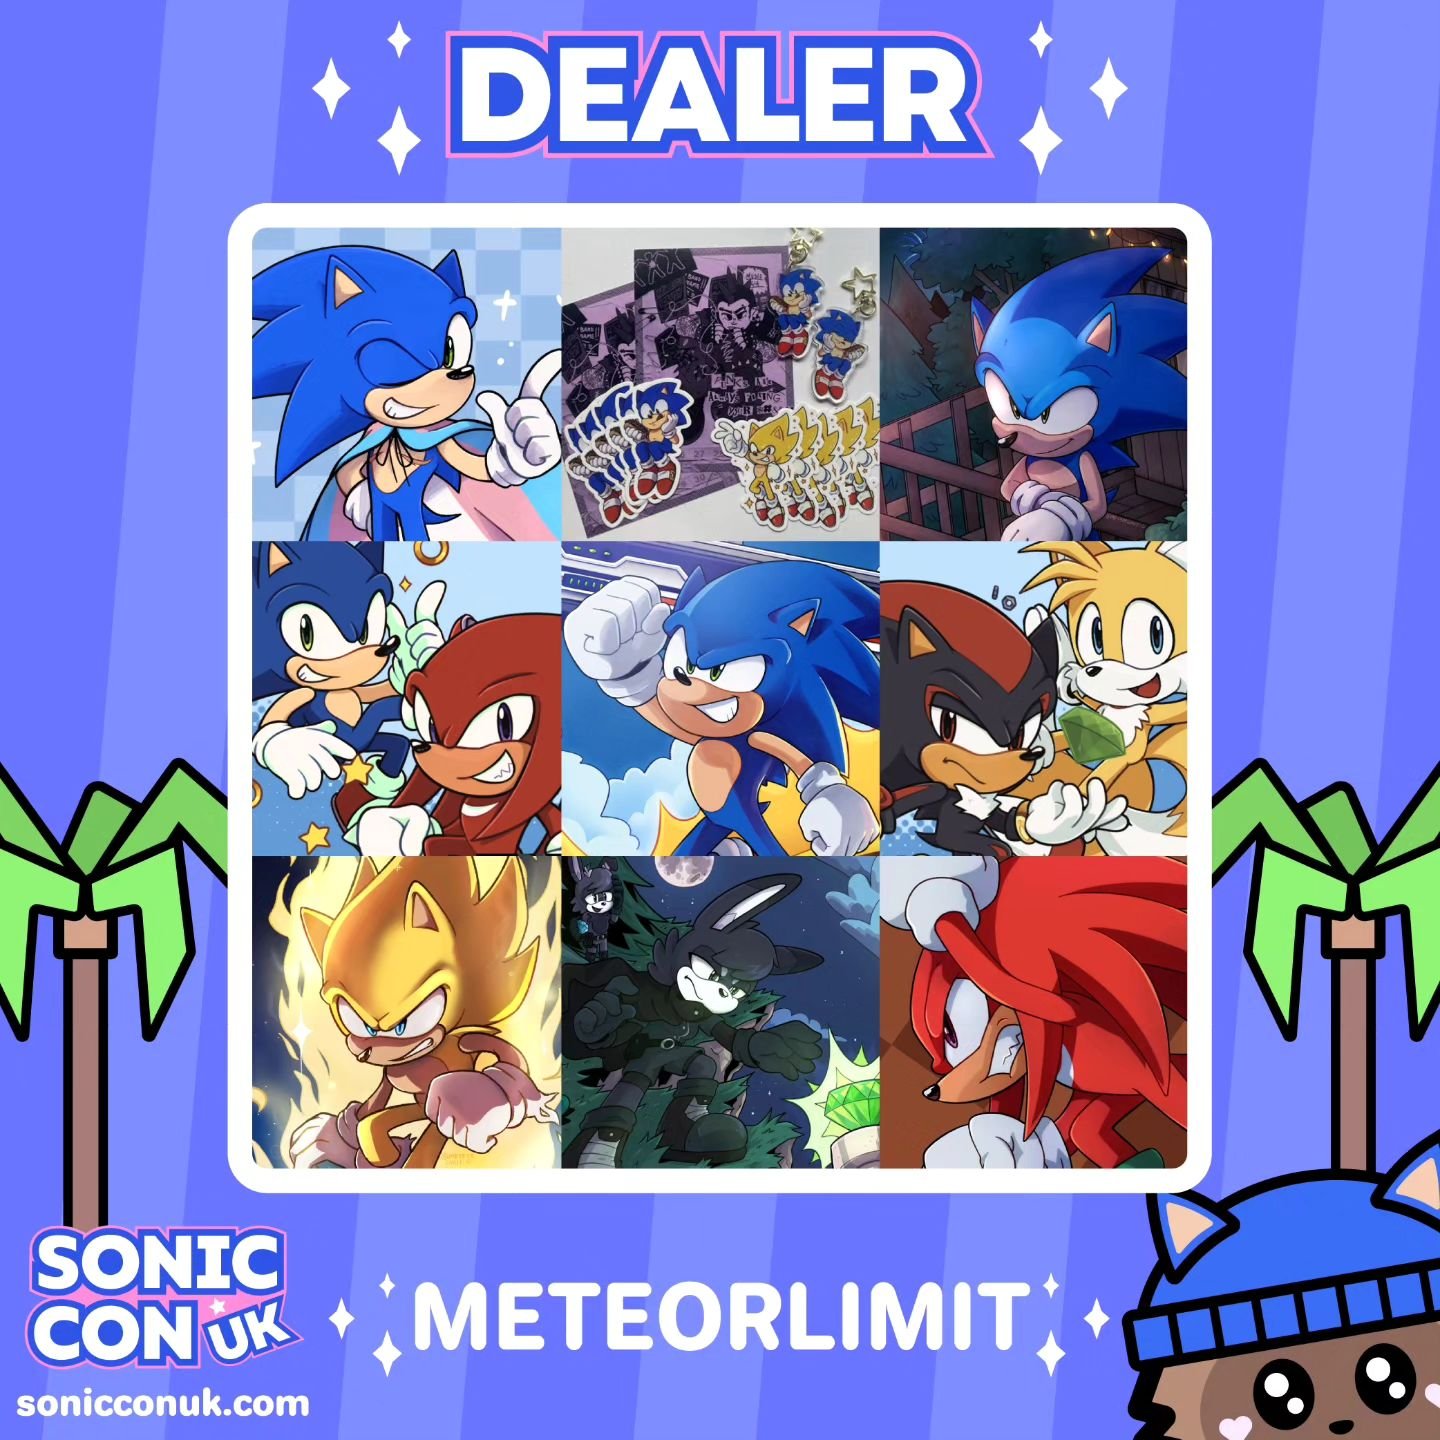 Dealer announcement! 💙🎉 We're excited to welcome @meteorlimit to Sonic Con UK! 💙🎉 They will be selling a variety of acrylic keychains, stickers, prints, button badges and more! 💙

#sonicthehedgehog #sonic #sonicfan #sonicfanart #sonicconvention